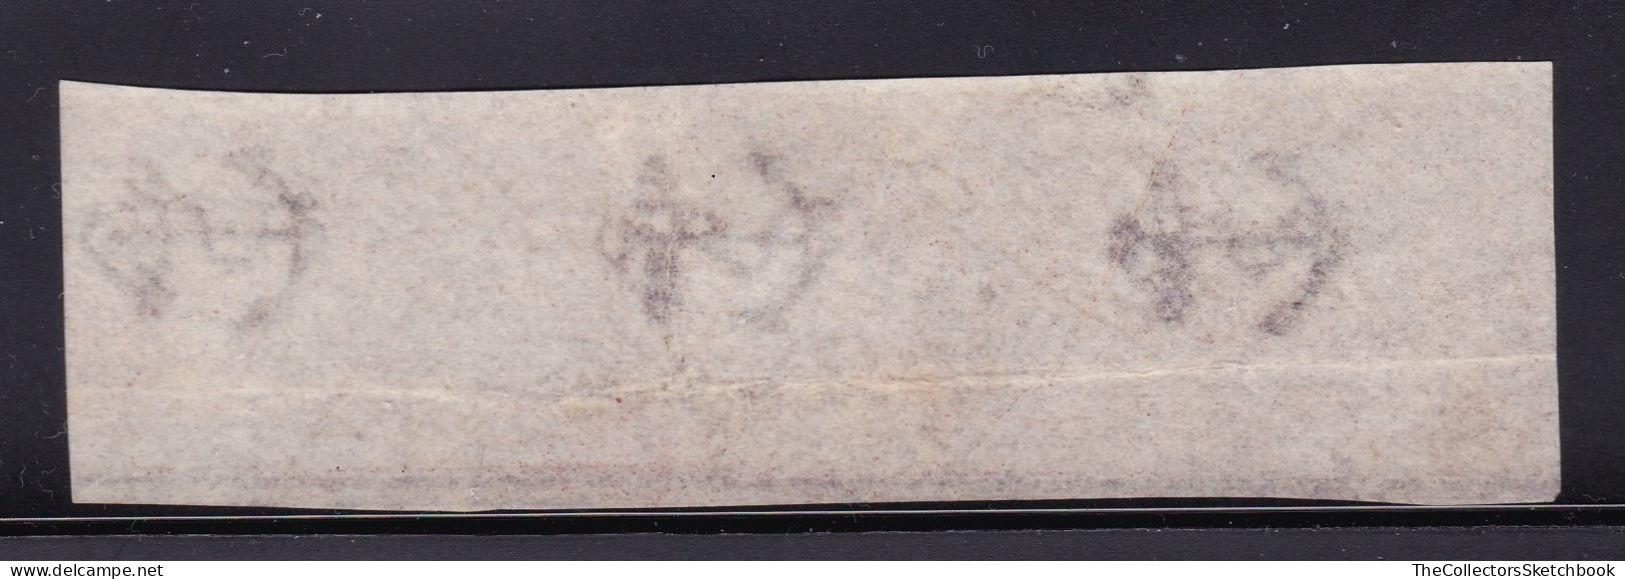 GB Fiscals / Revenues Life Policy 6d -  Red - Brown Barefoot 2. Watermark Fouled Anchor With Stock  Average Used - Steuermarken